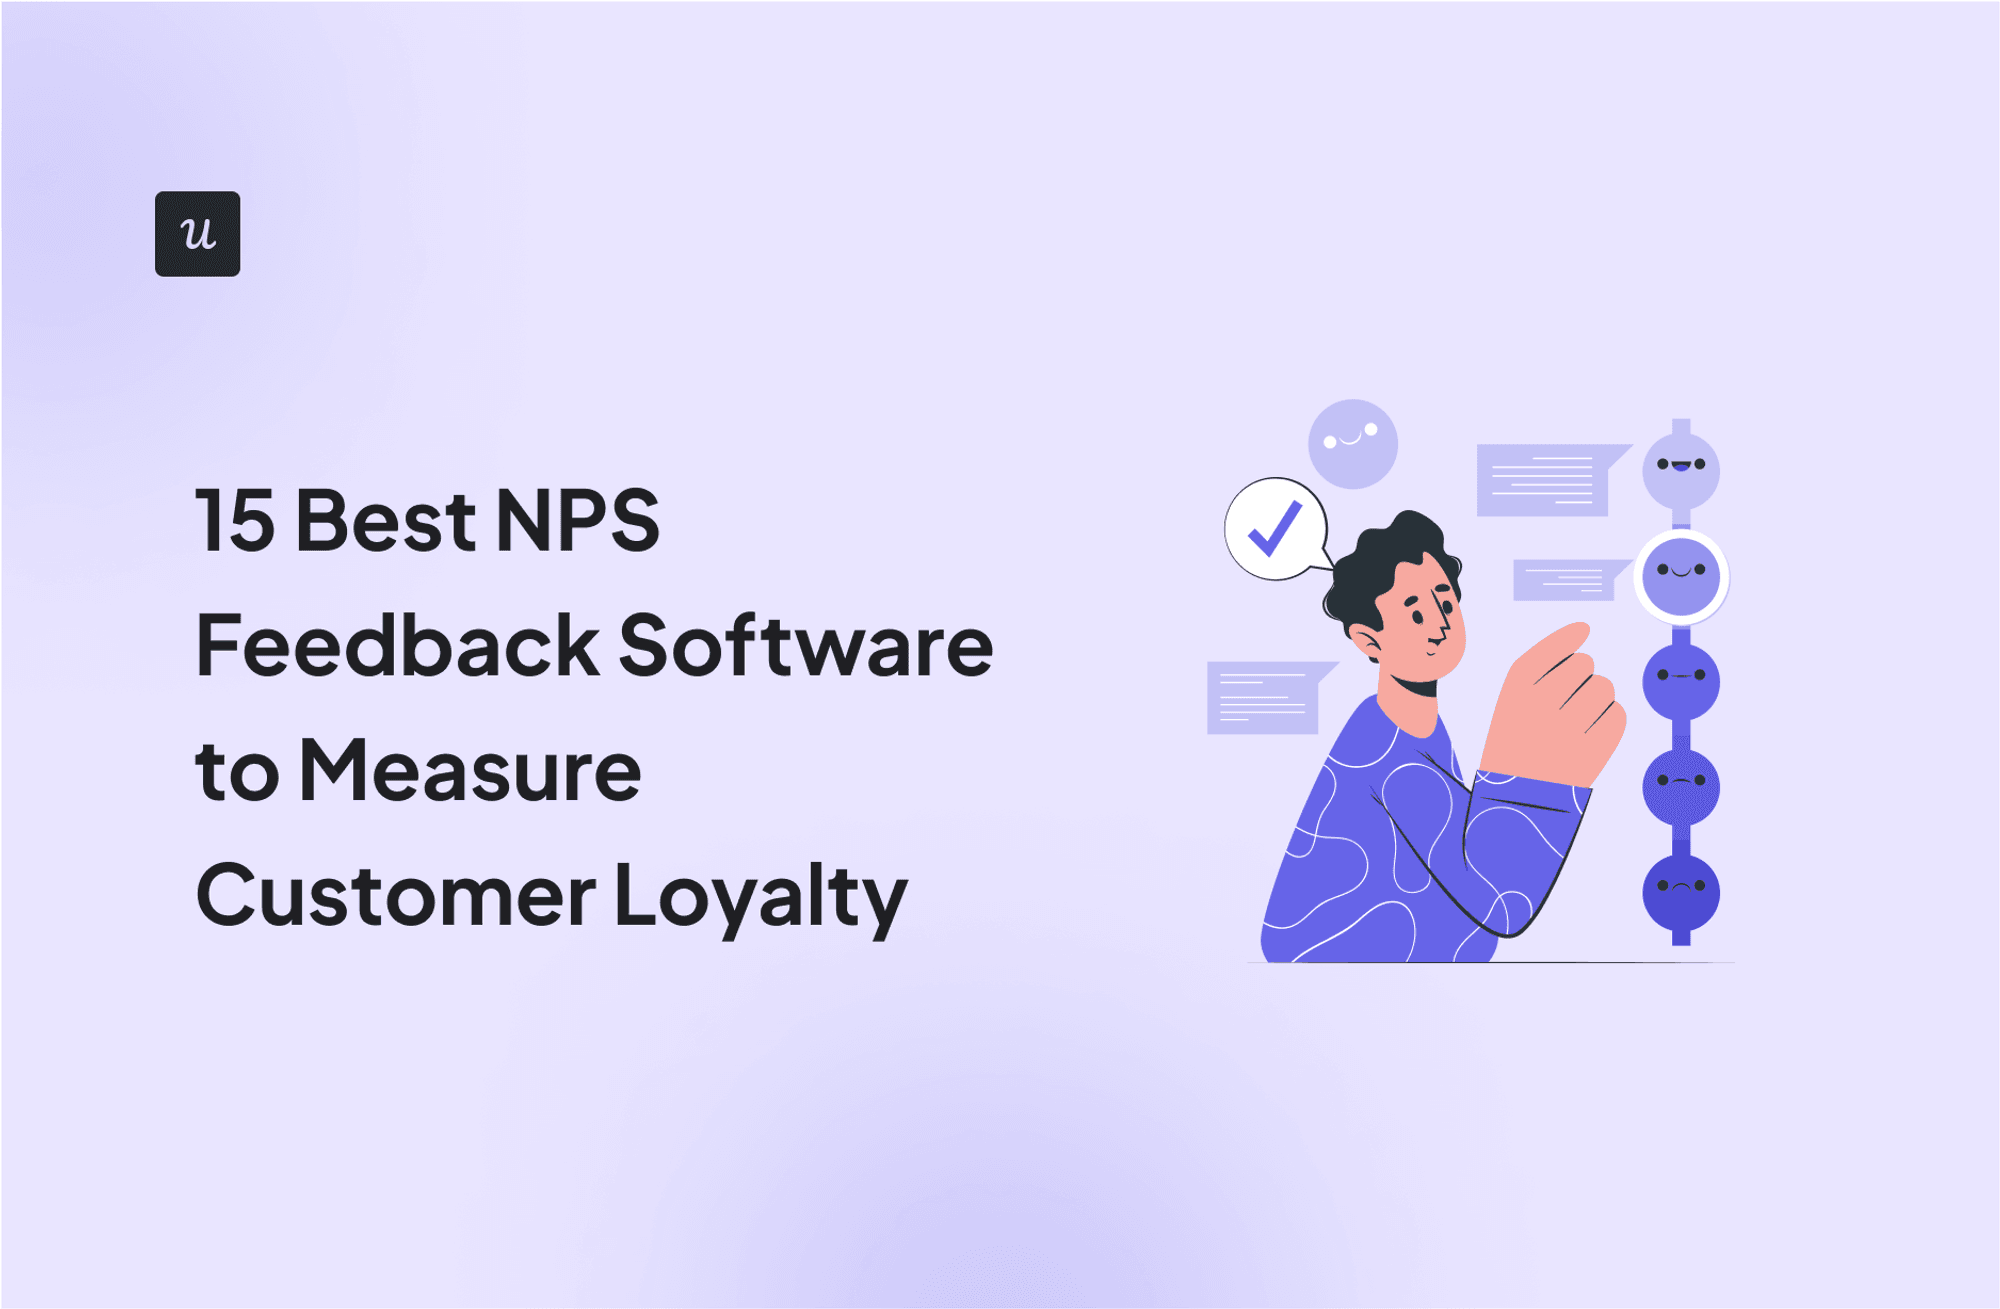 15 Best NPS Feedback Software to Measure Customer Loyalty cover